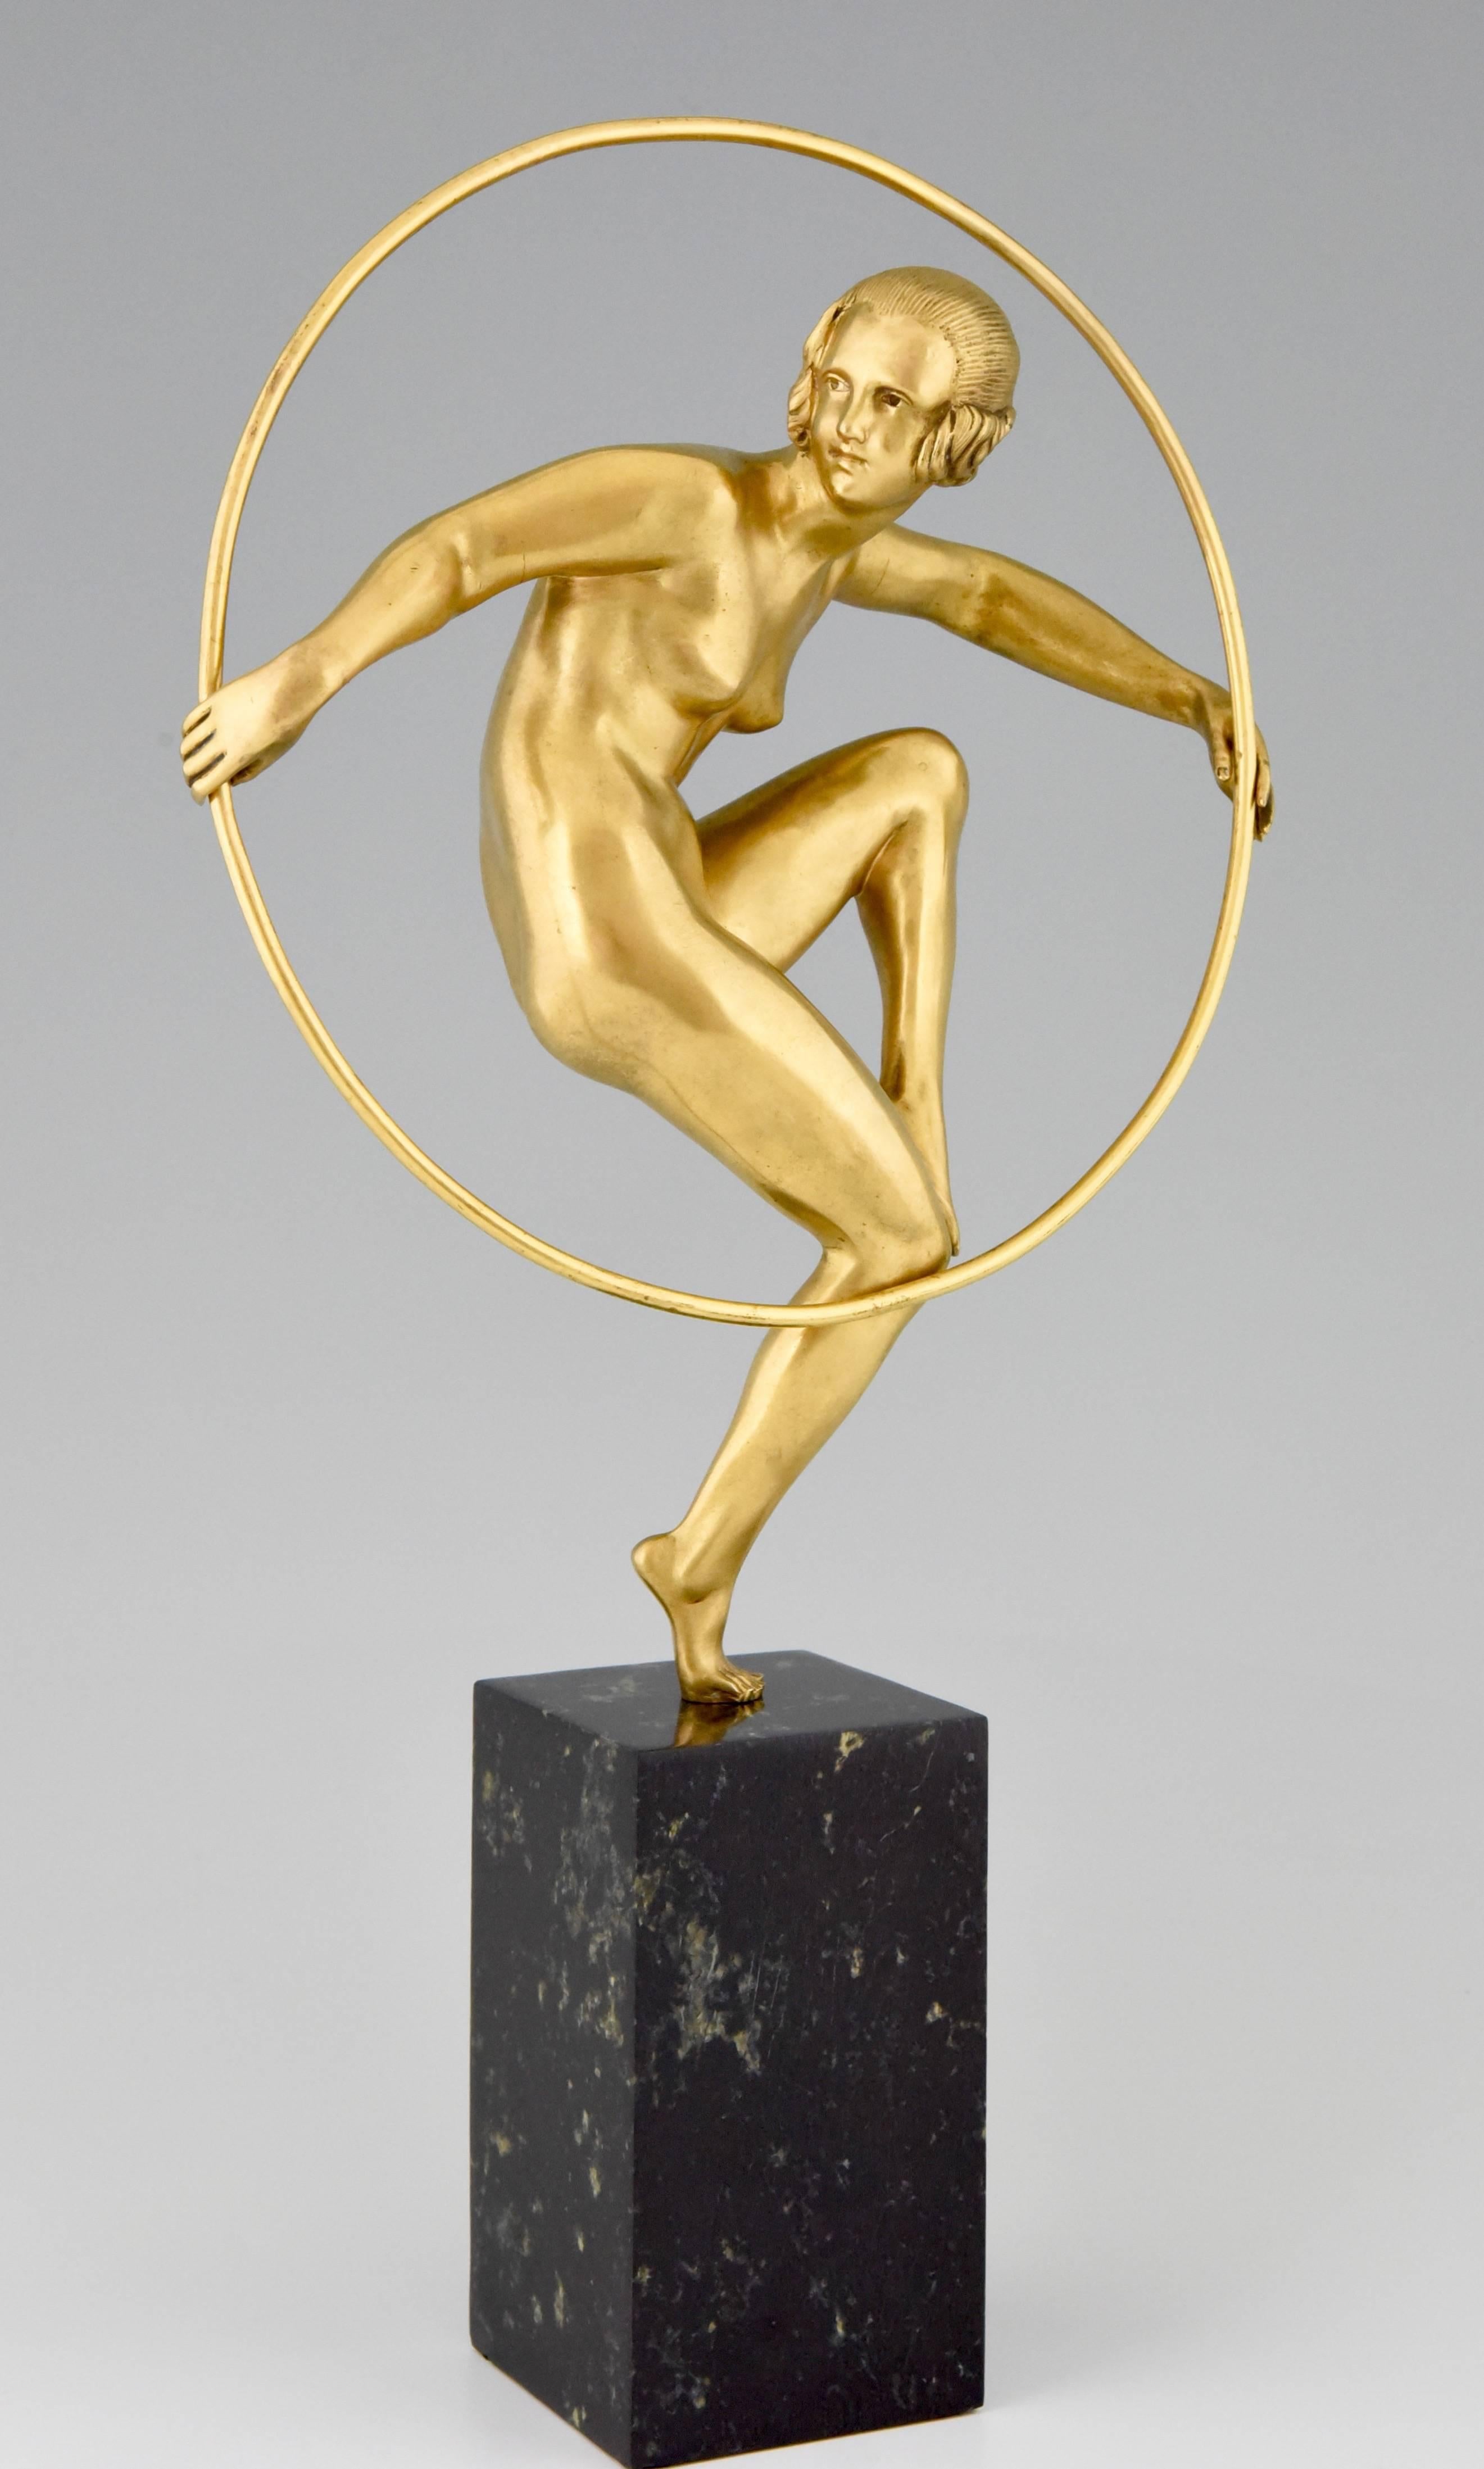 Description: 
Girl with hoop.
Nude dancing on one leg holding a hoop.

Artist/ Maker:
Marcel André Bouraine, 1886-1948. 

Signature/ Marks : 
A. Bouraine.

Style:
Art Deco.

Date:
circa 1930.

Material: 
Gilt bronze on a marble base. 

Origin: